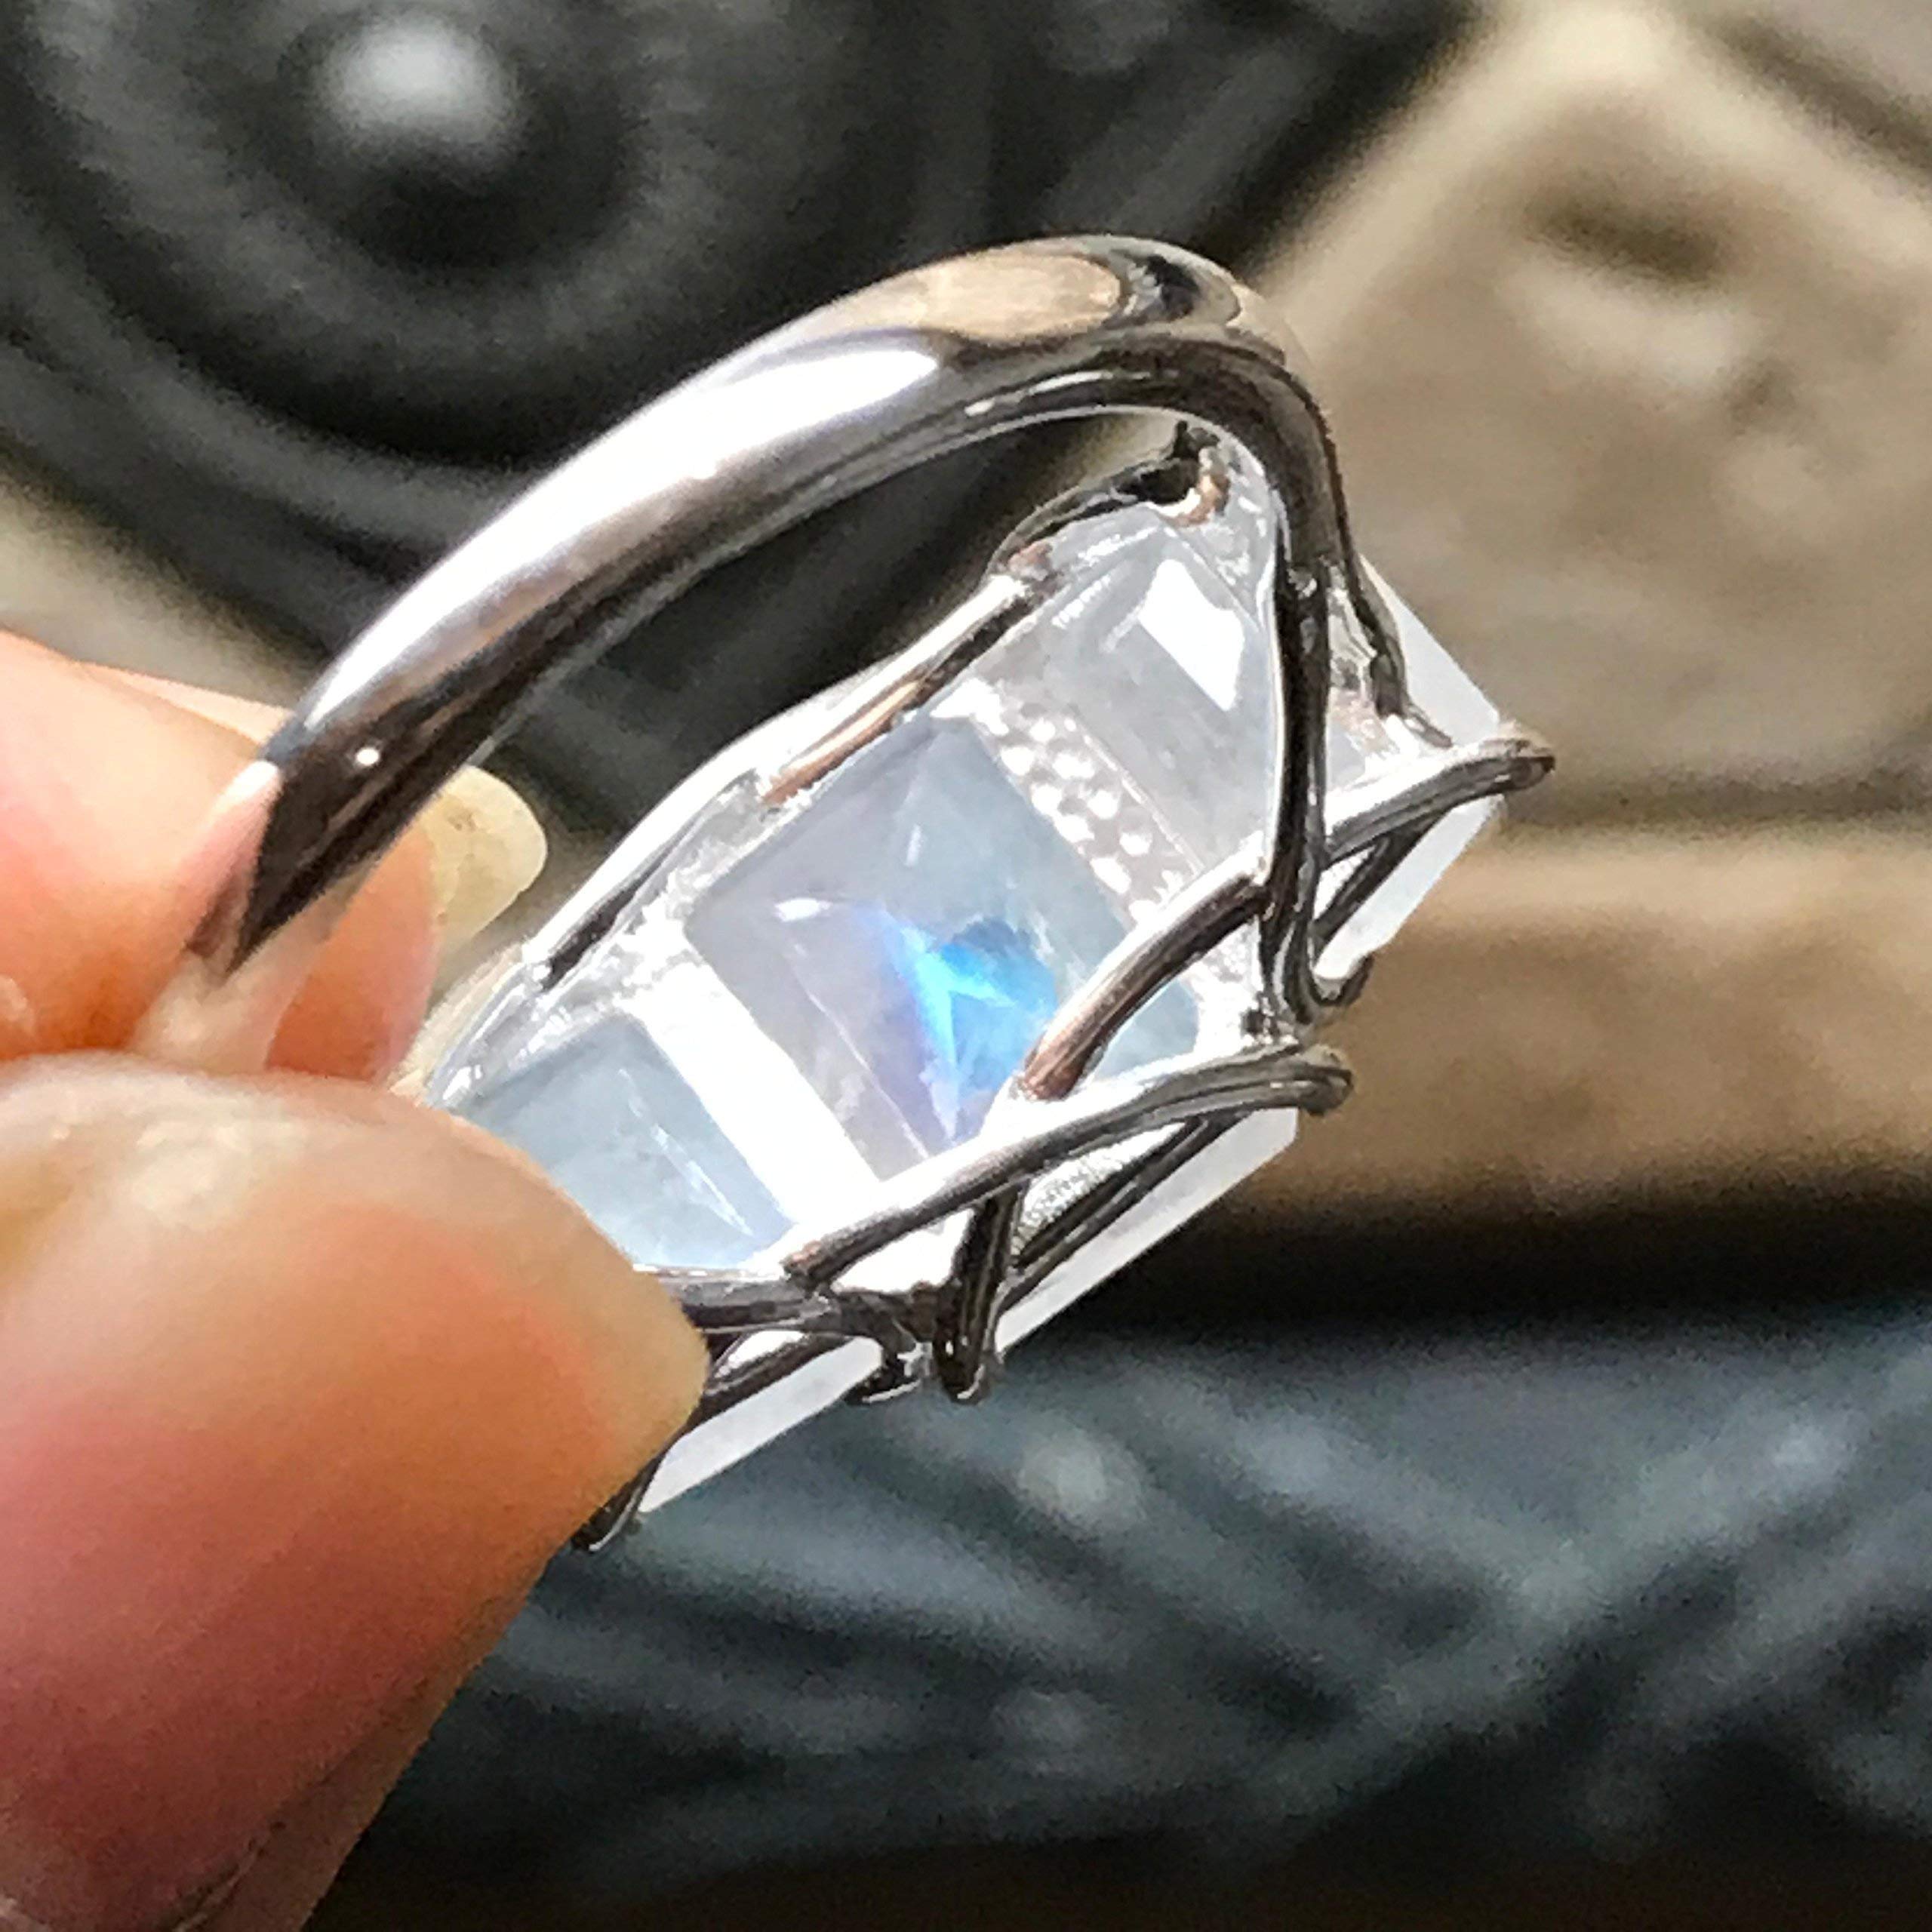 Genuine Rainbow Moonstone 925 Solid Sterling Silver Ring Size 6, 7, 8, 9 - Natural Rocks by Kala